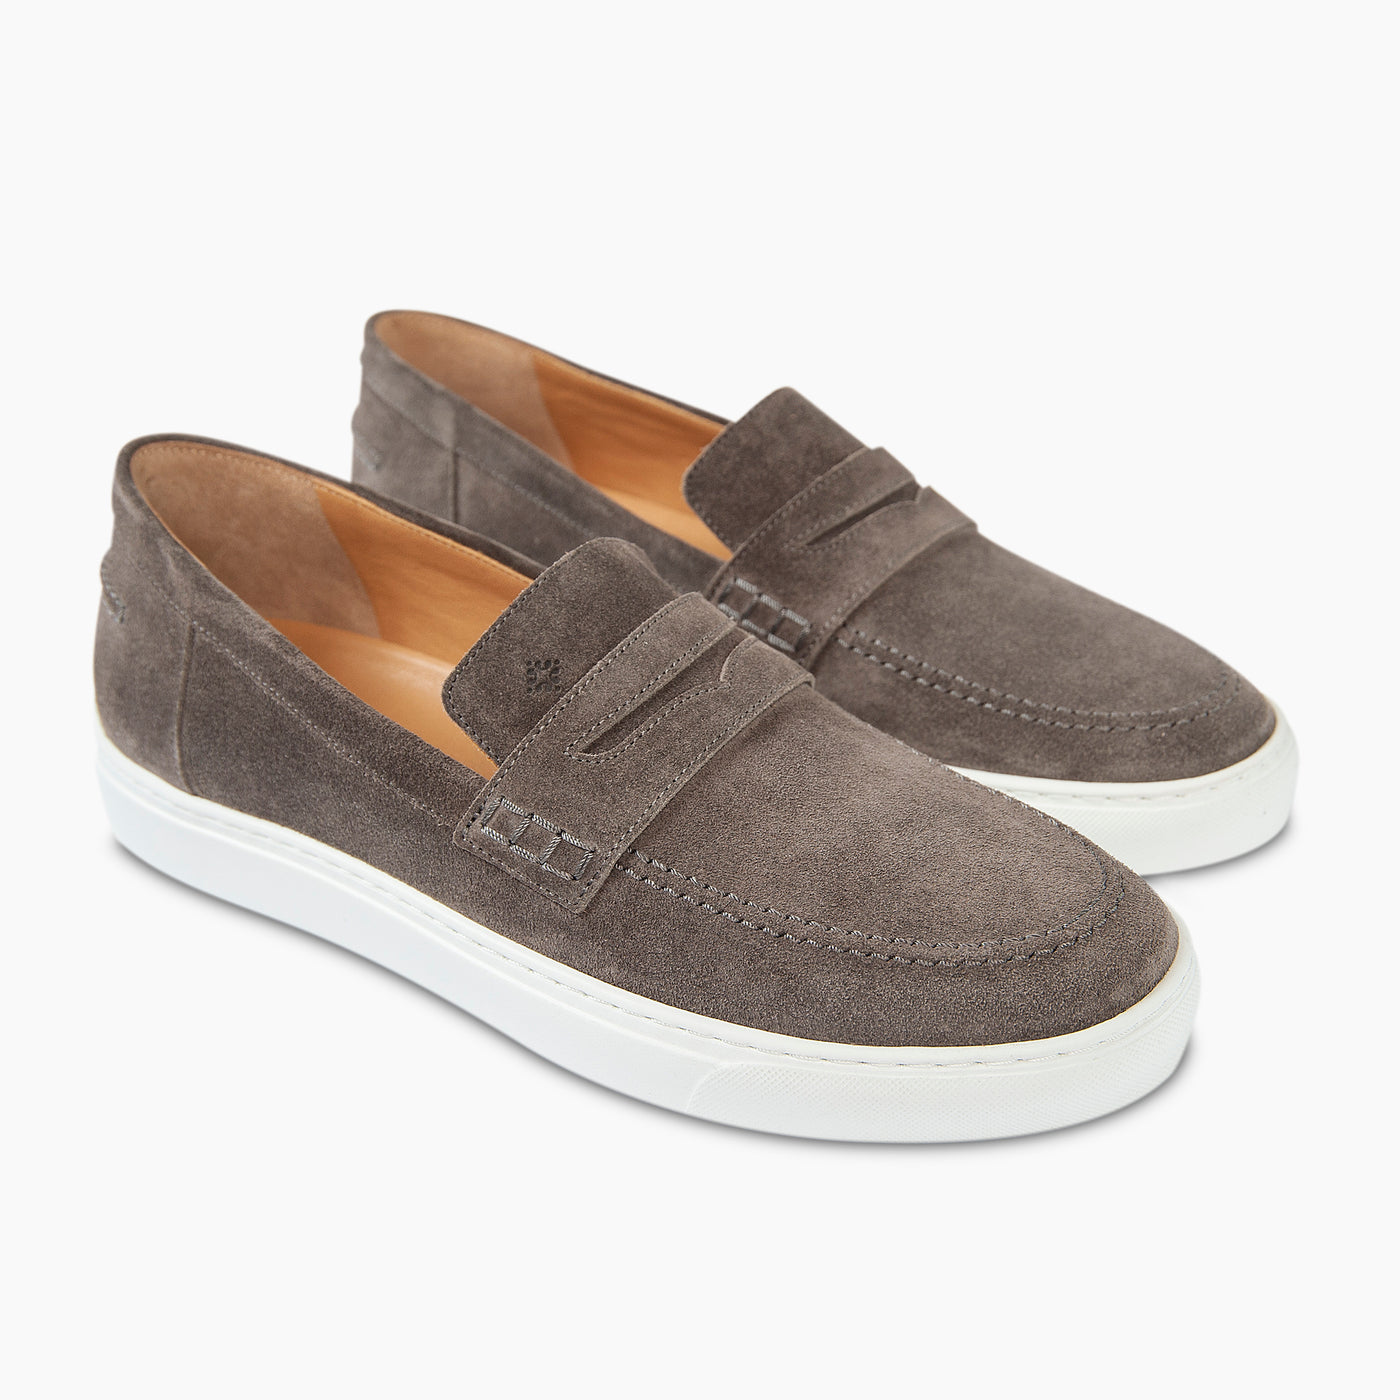 AND casual moccasins in suede and rubber sole